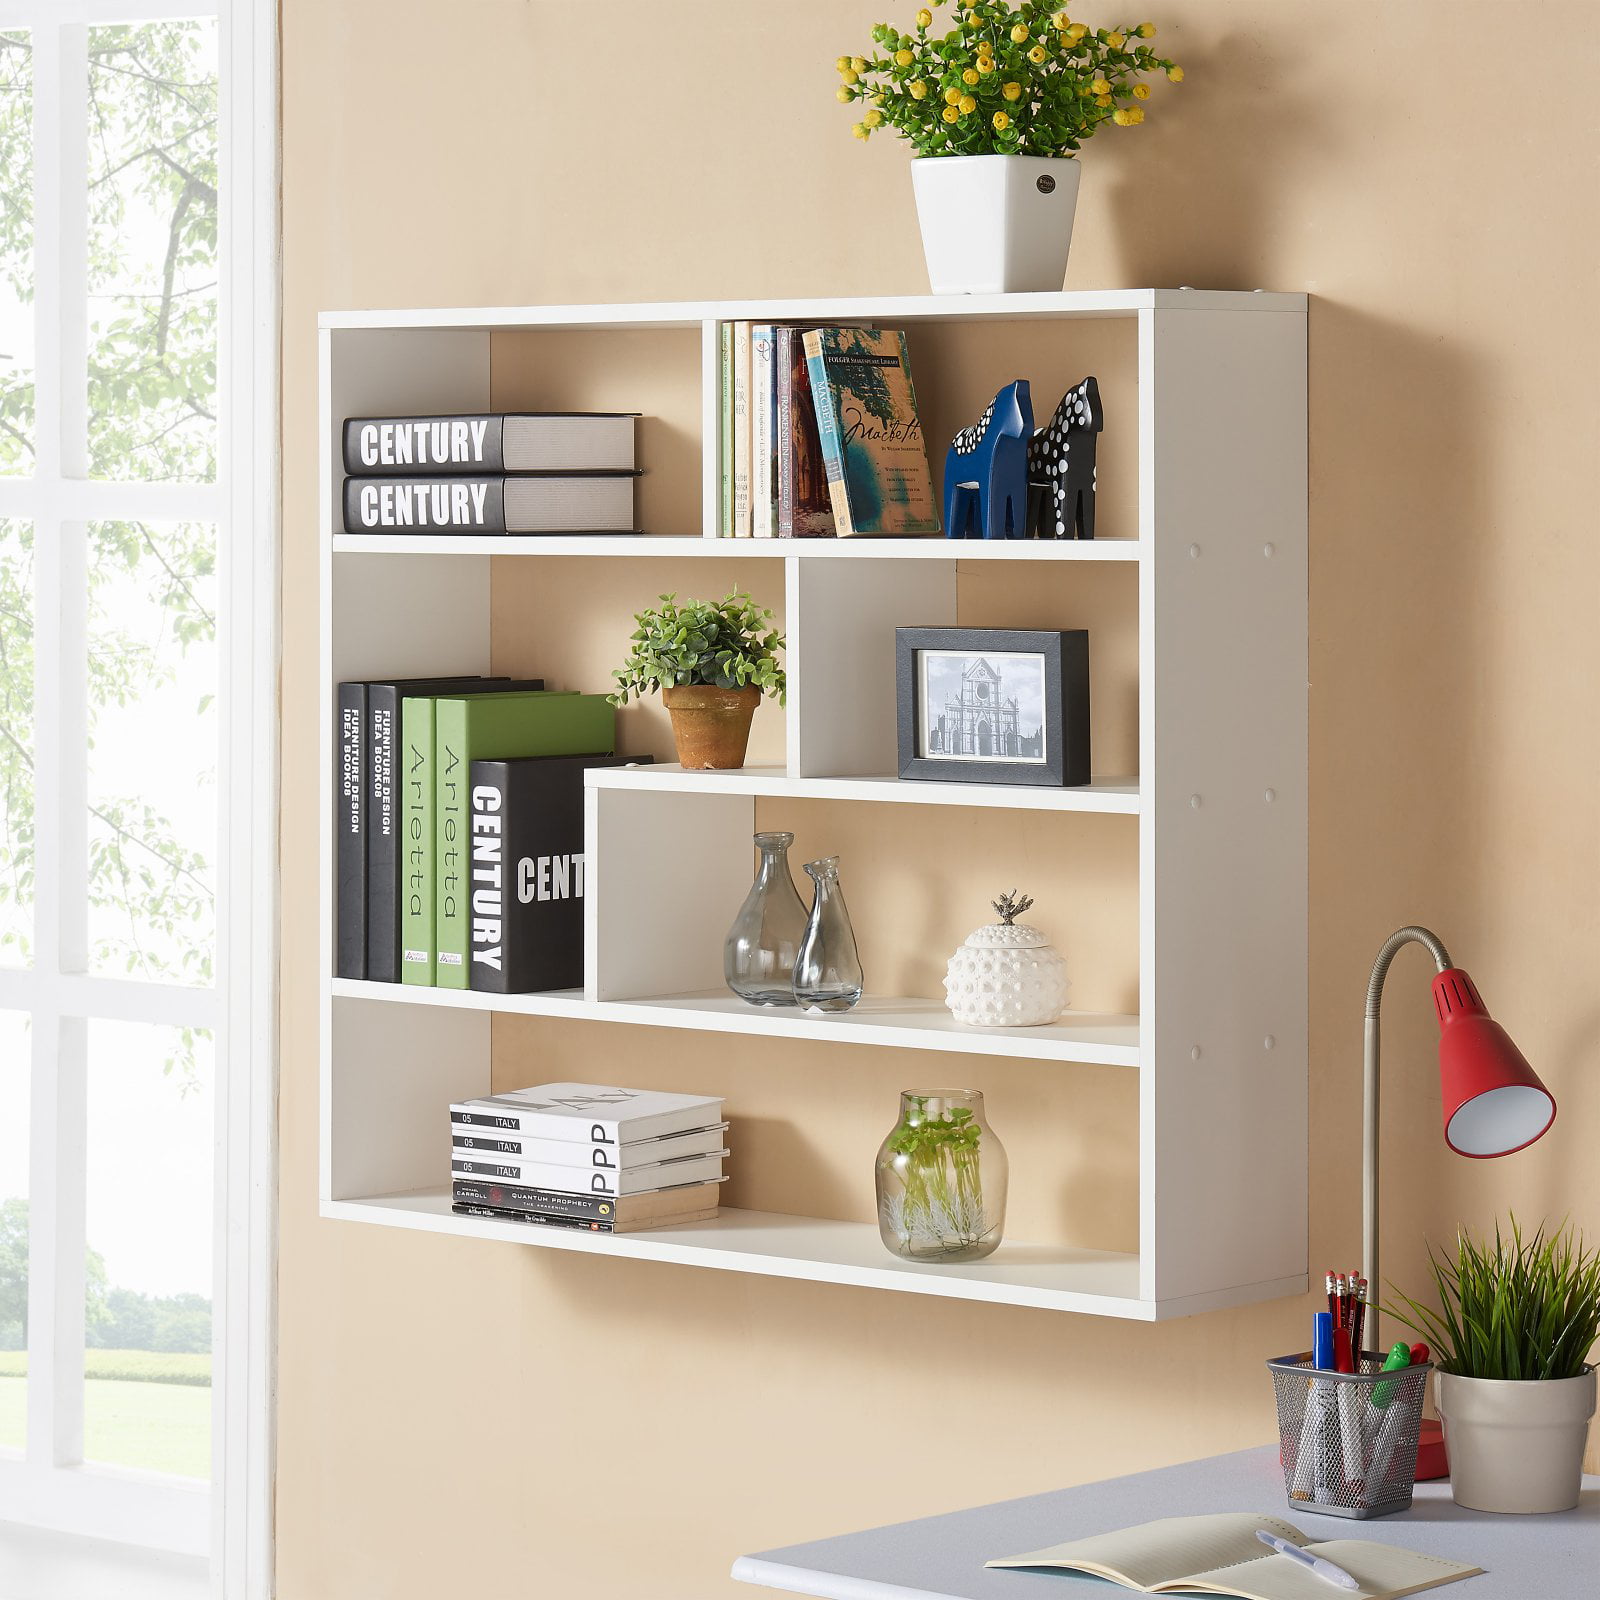 10.5 x 16 3 Tier Wall Shelving Unit with Towel Rack and Trays  Chrome/White - Danya B.